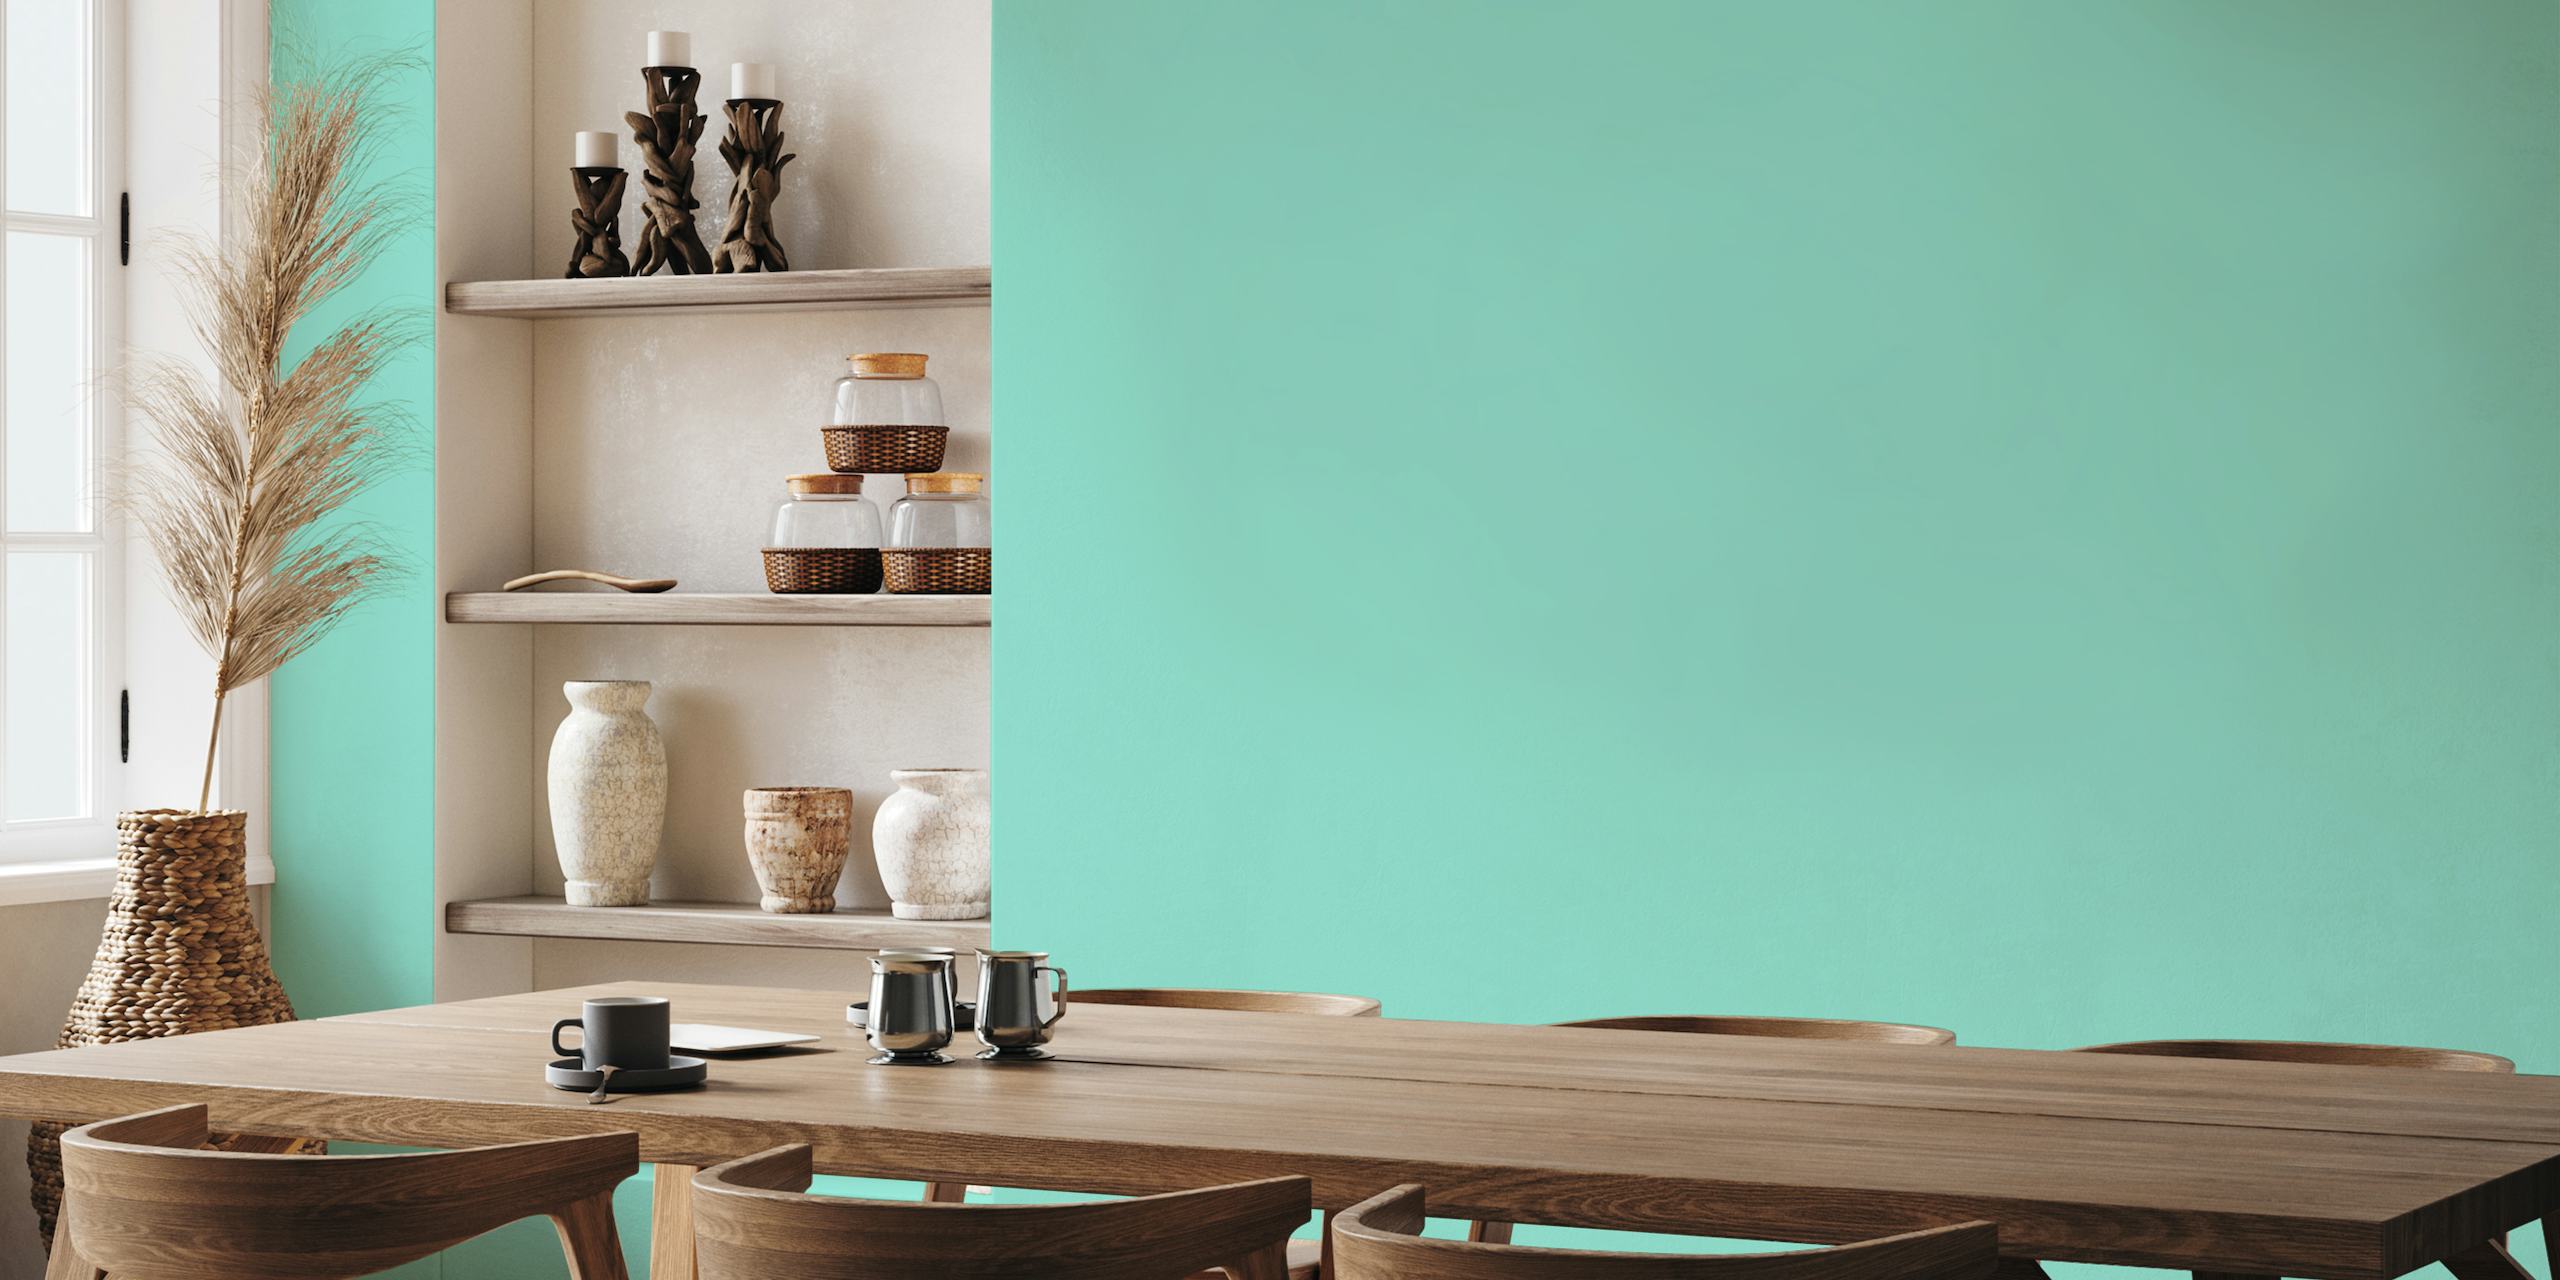 Pale Robin's Egg Blue solid color wall mural displaying a gentle and tranquil blue hue.